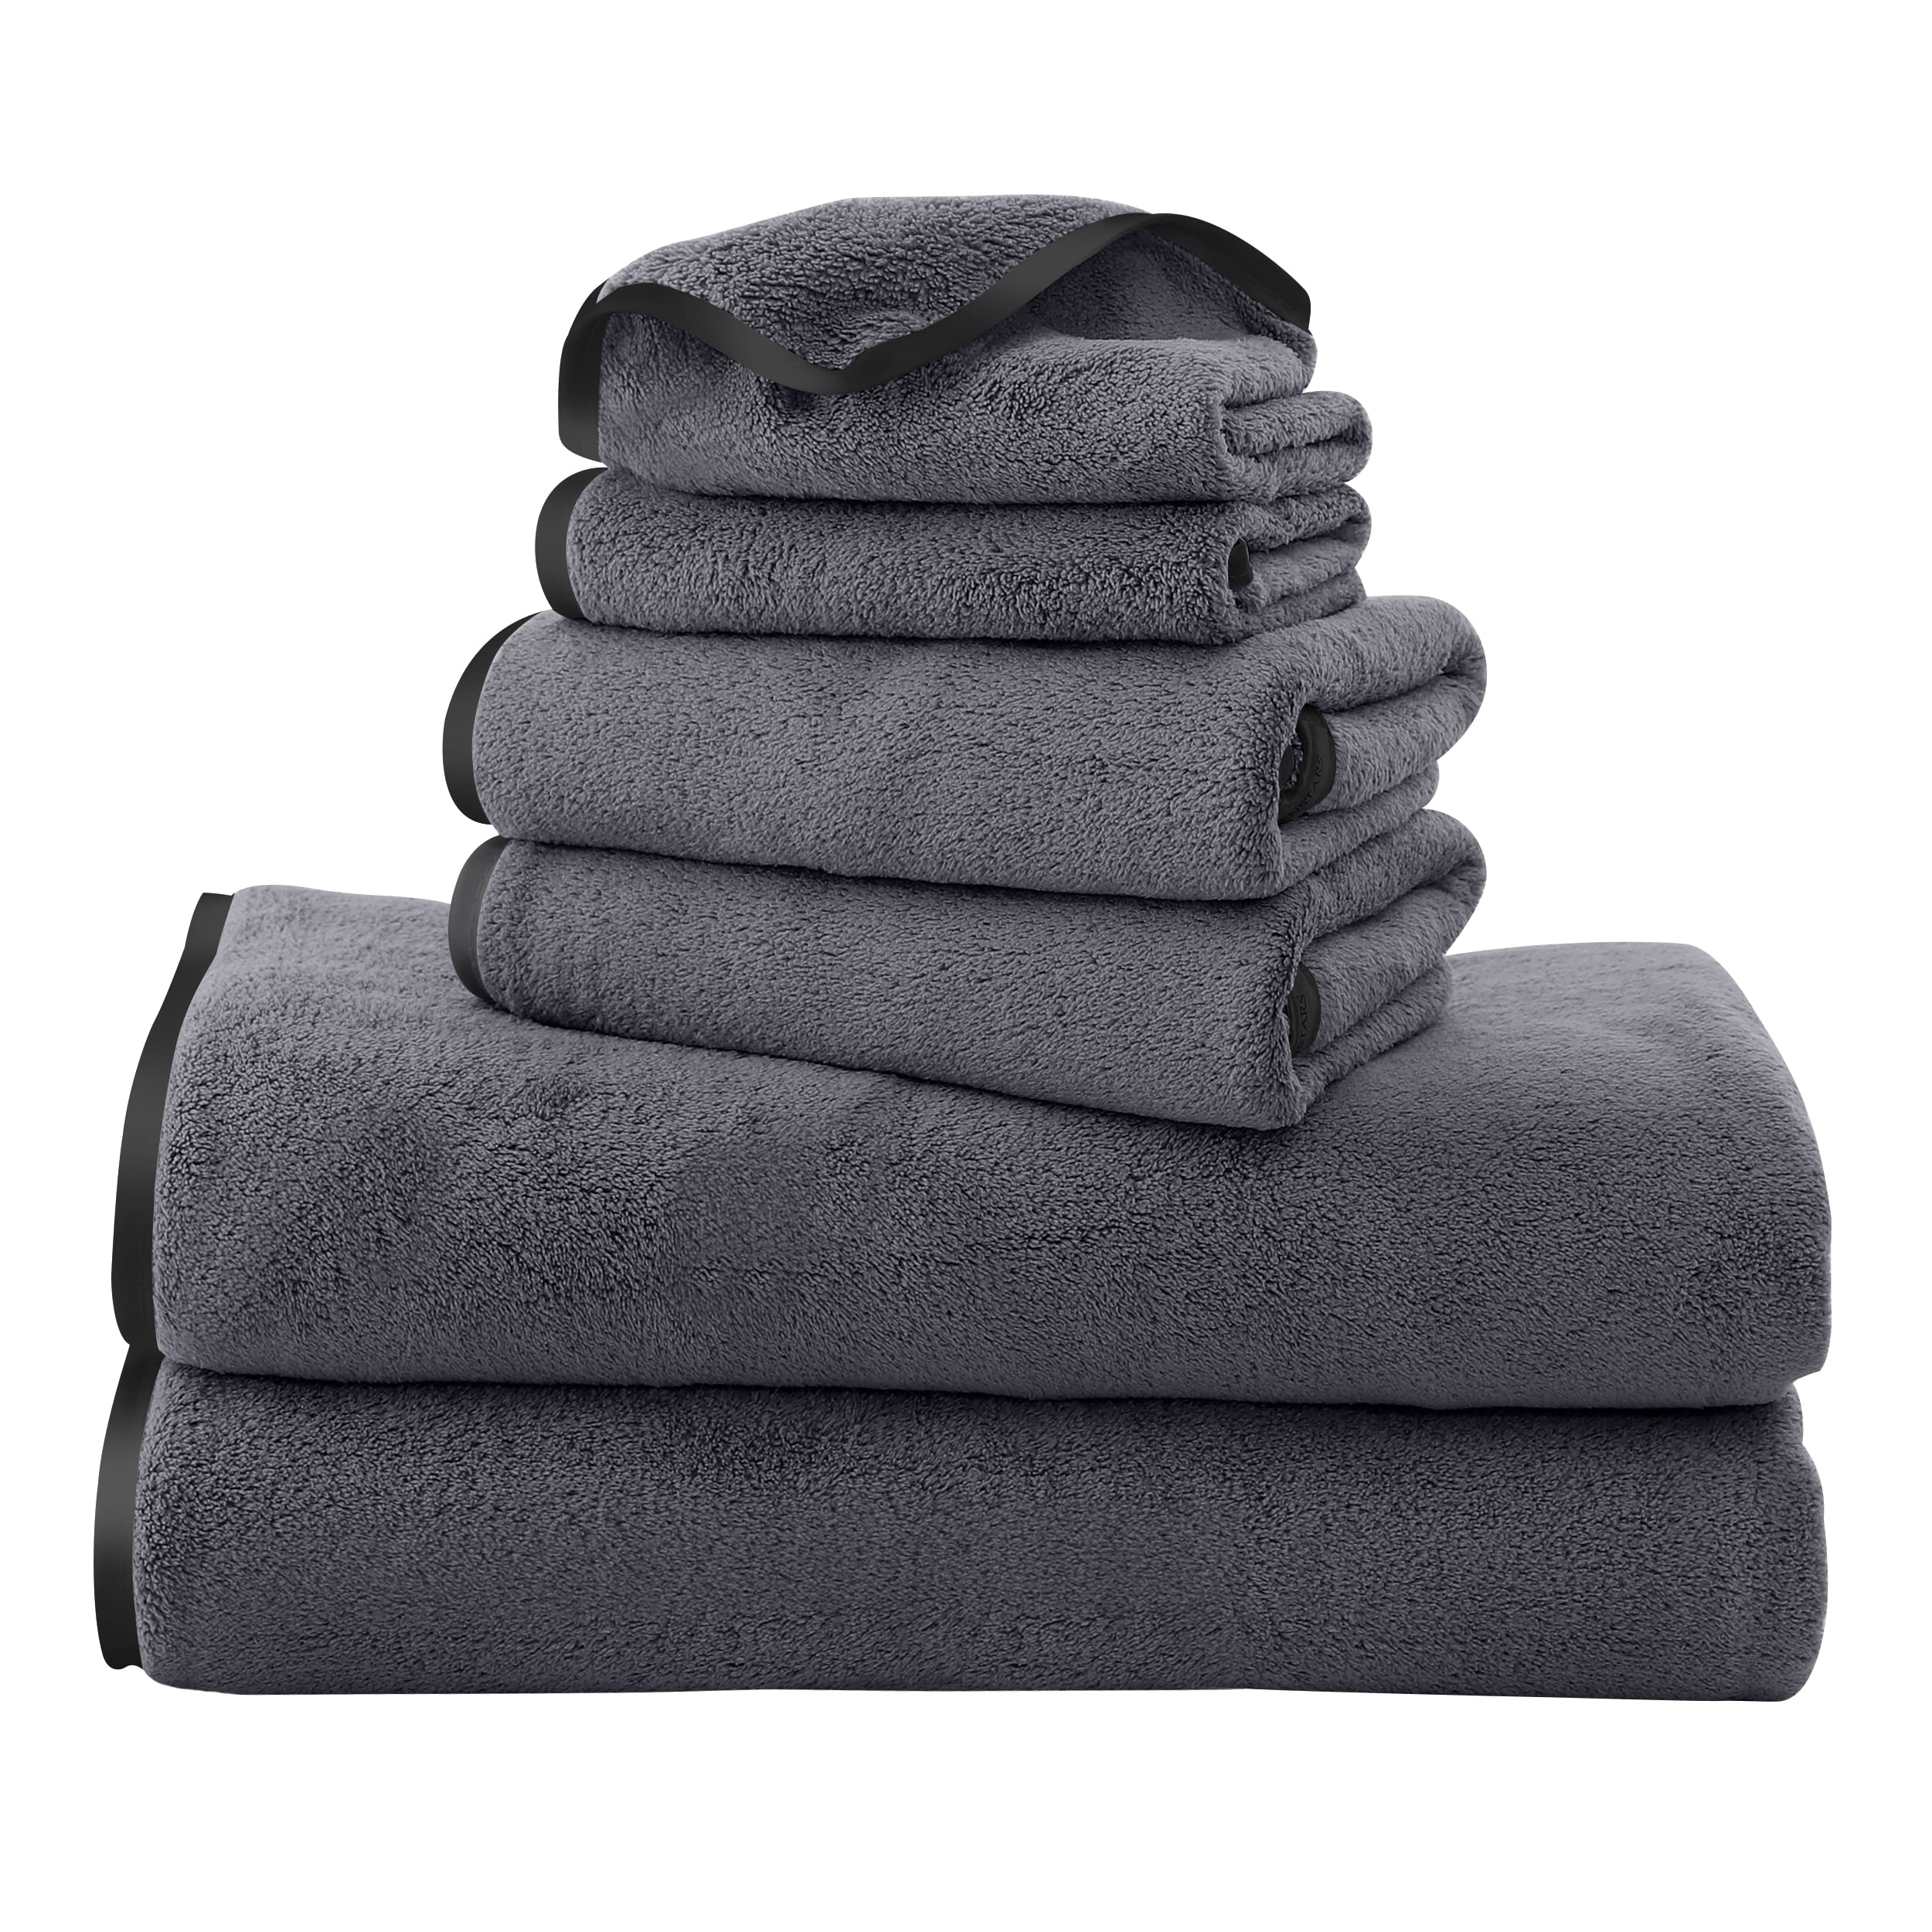 Bath Towel - Microfiber Bath Towel, Highly Absorbent Microfiber Towels for Body, Quick Drying, Microfiber Bath Towels for Sport, Yoga - Grey, Men's